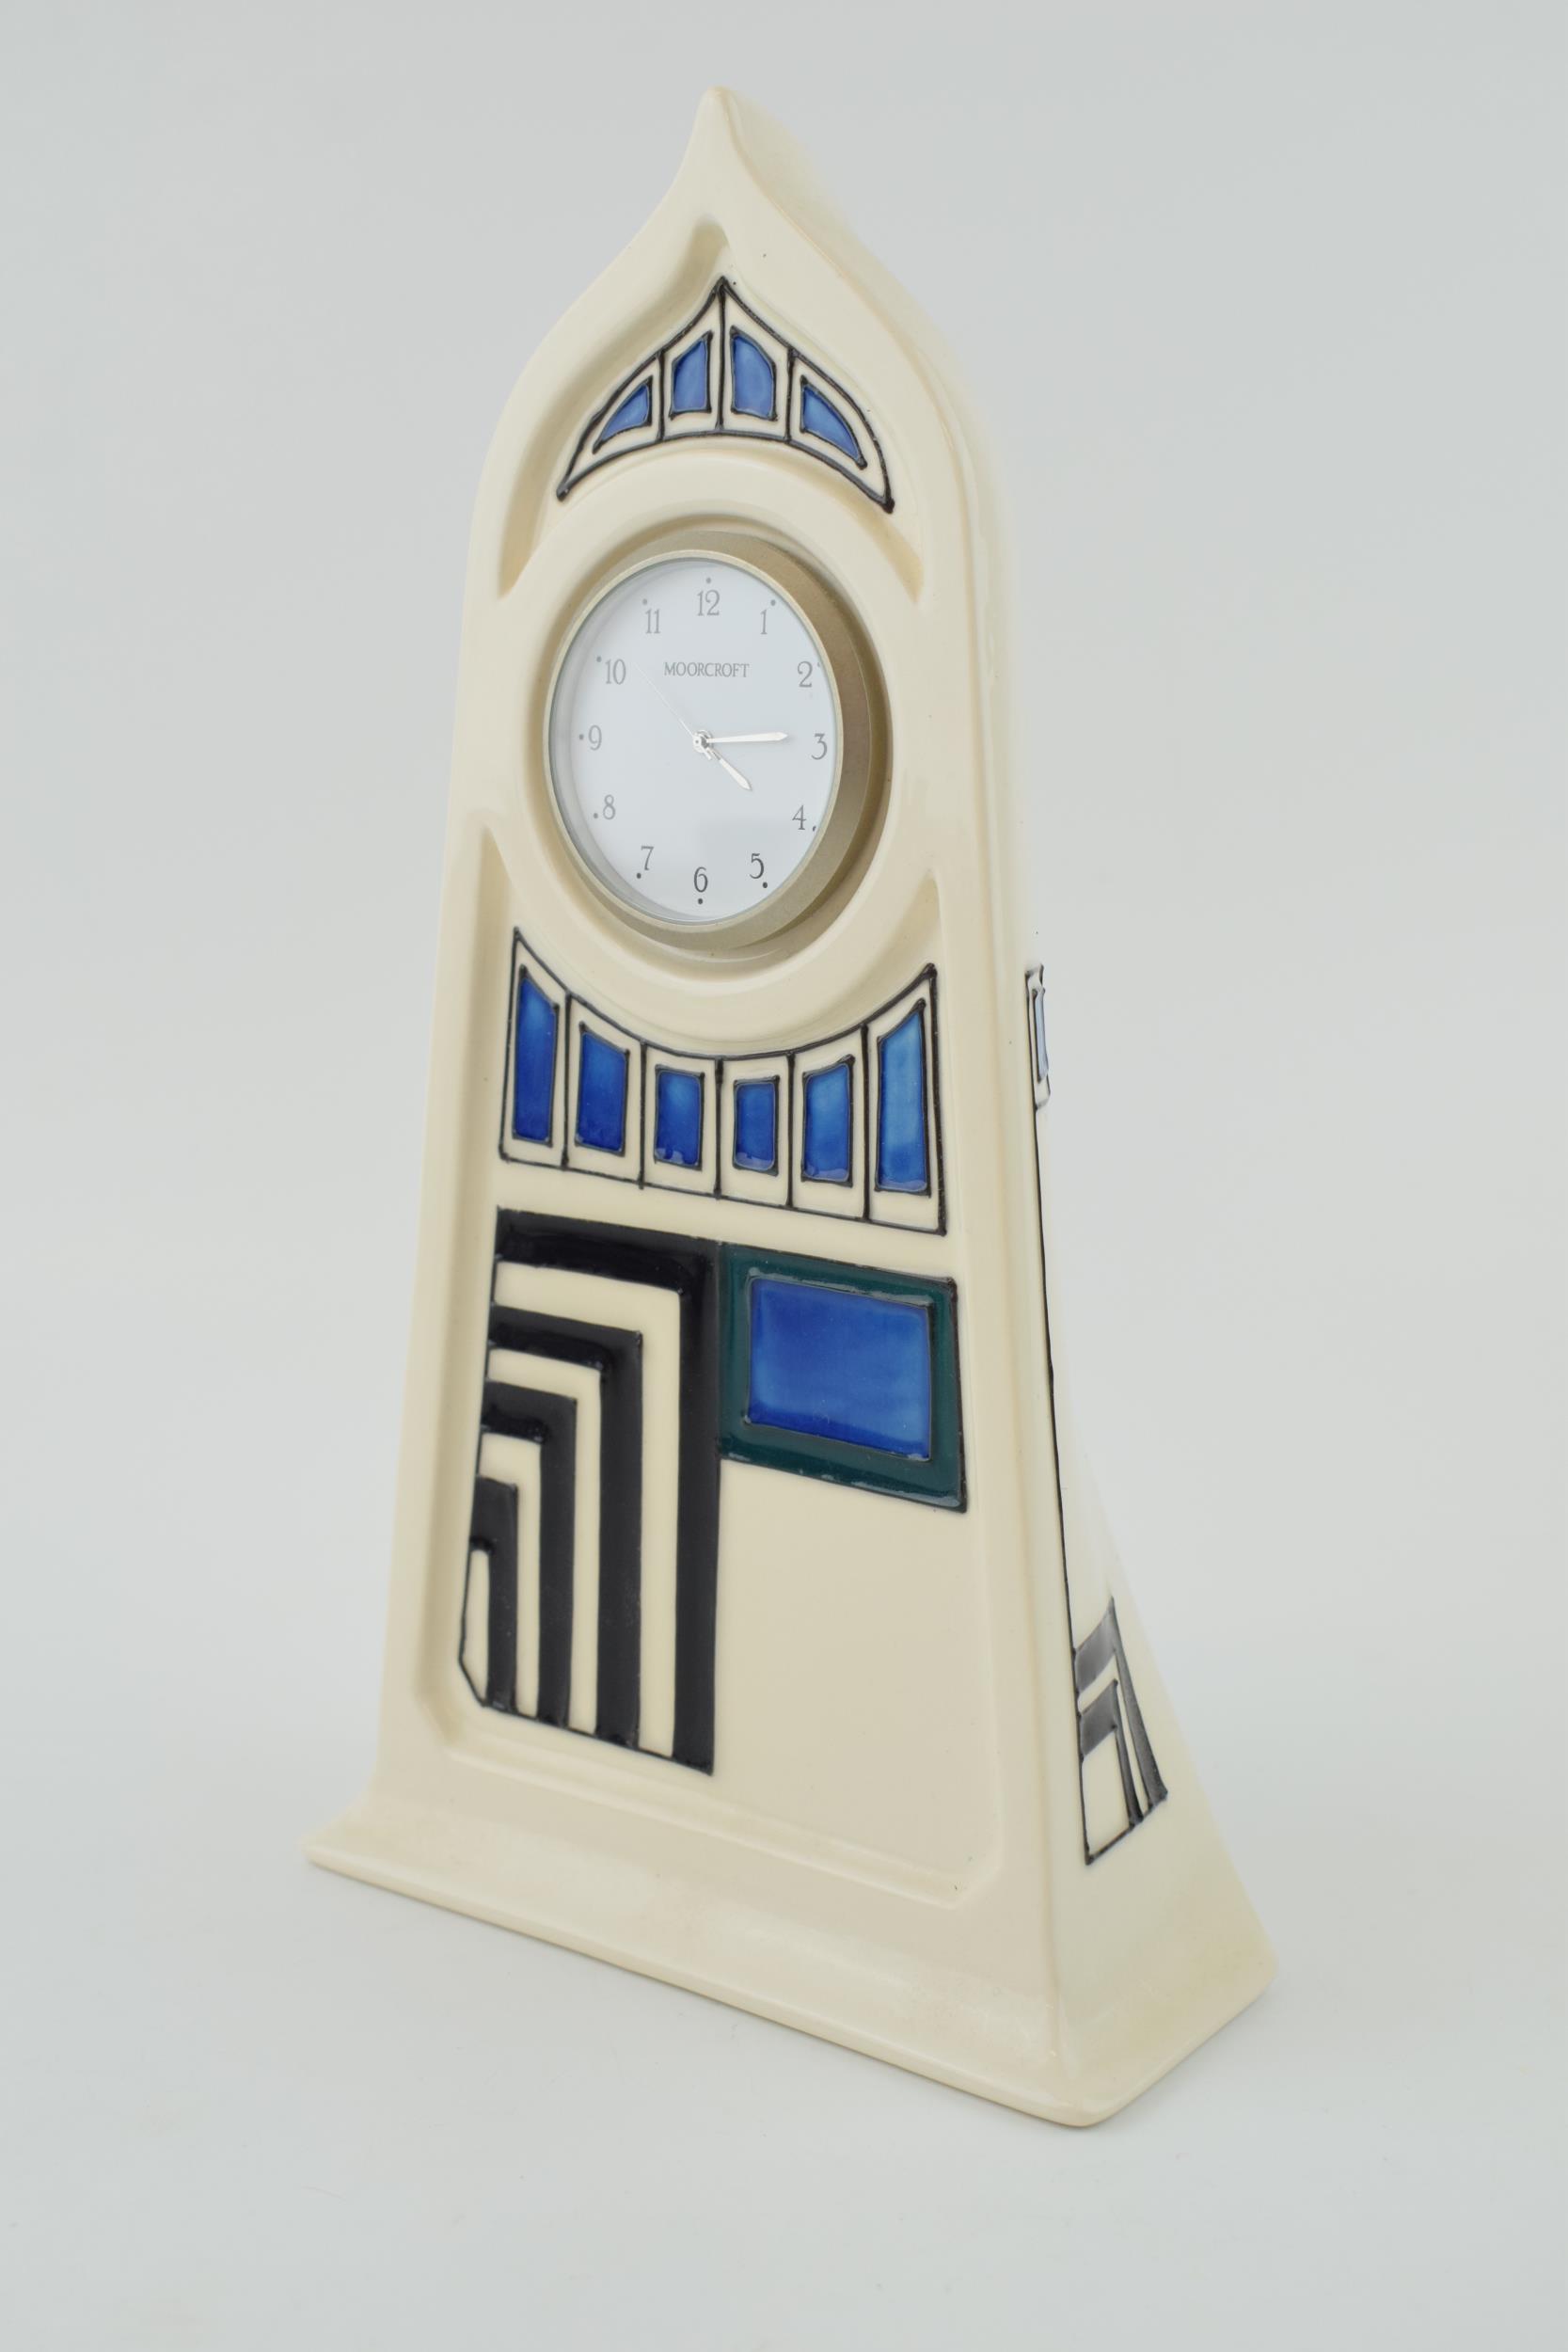 Moorcroft Mackintosh style derngate mantle clock, 23cm tall. In good condition with no obvious - Image 2 of 4